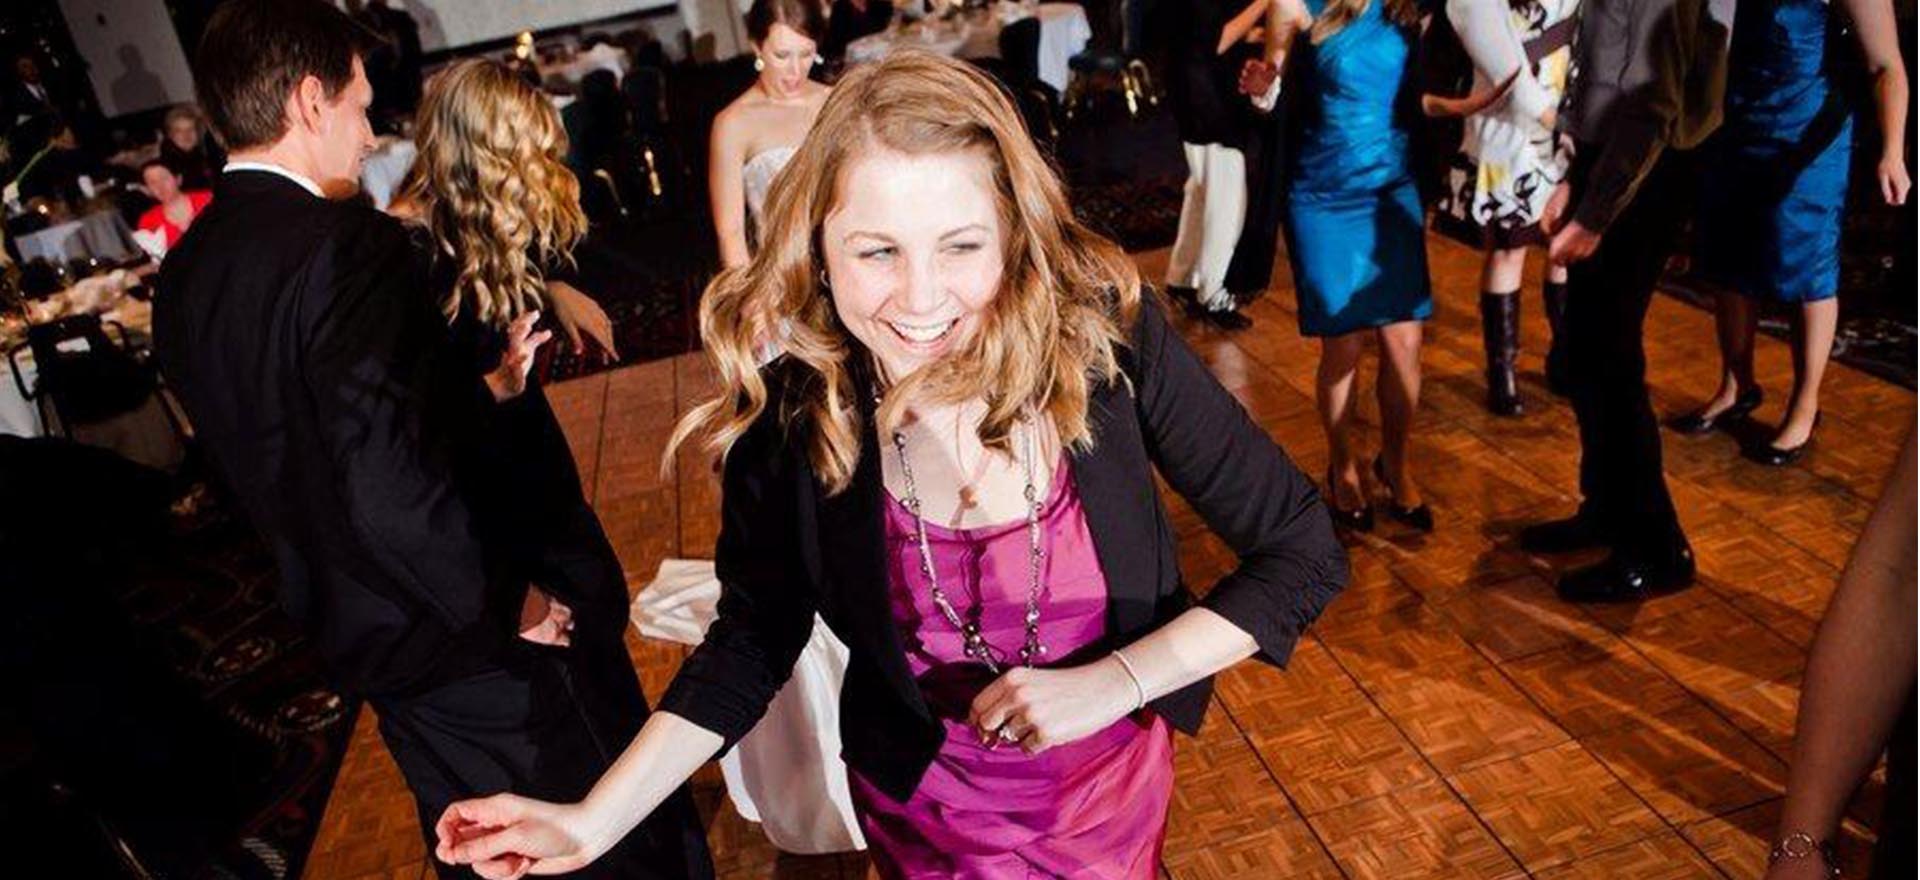 Girl in magenta colored dress and small black jacket with a huge smile in the middle of the dance floor.